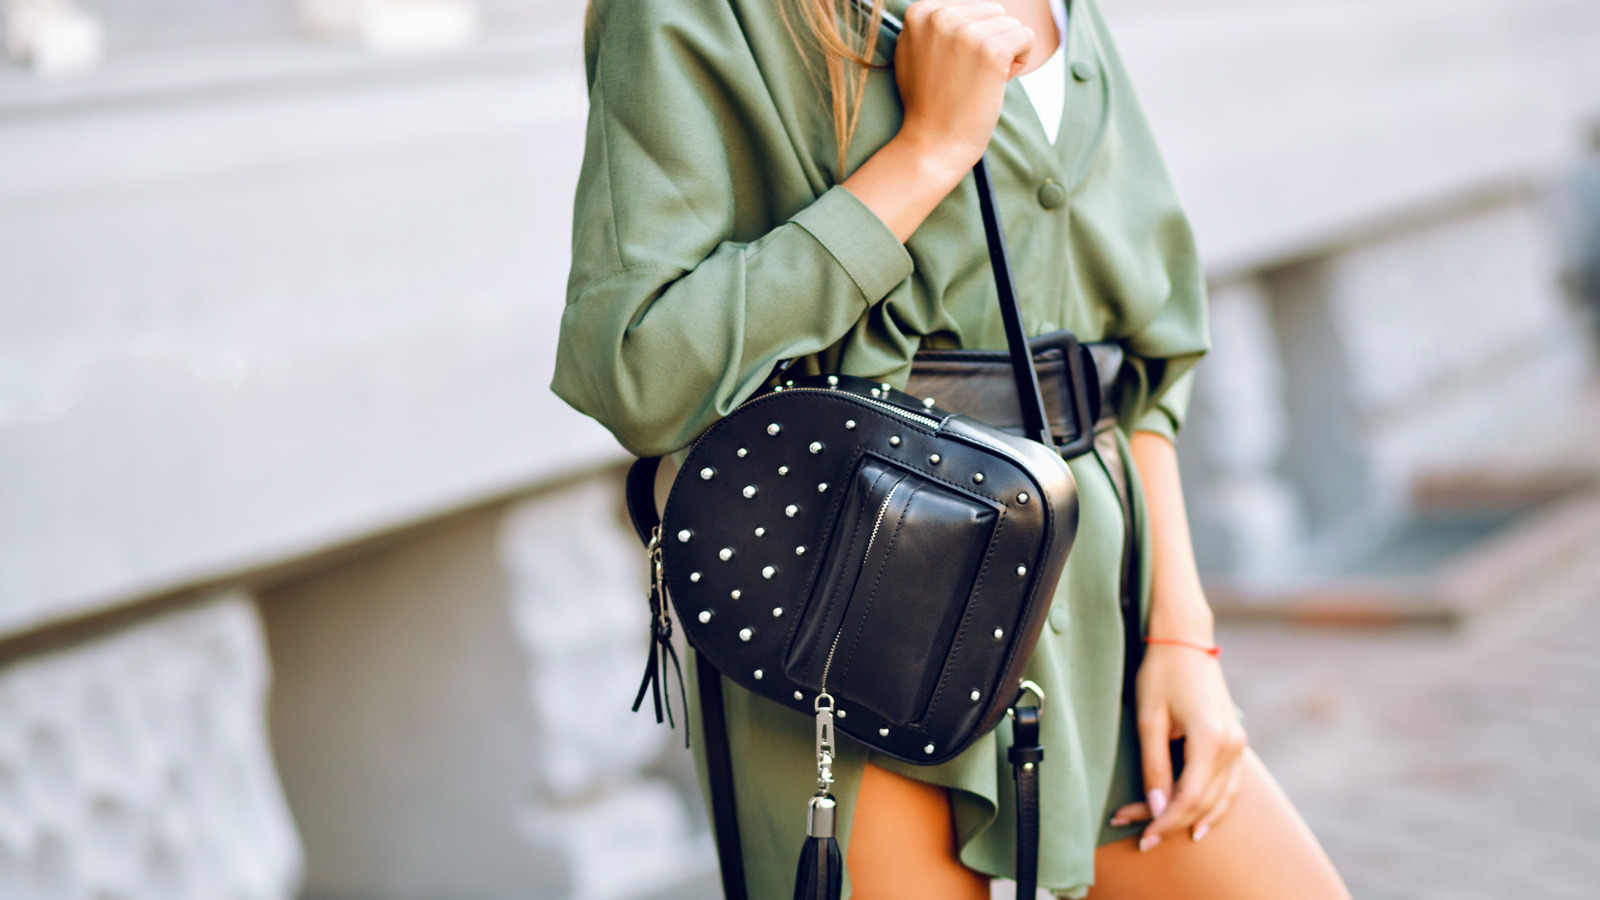 Mini Backpacks -- 4 Fabulous Looks at This Hot Fashion Trend